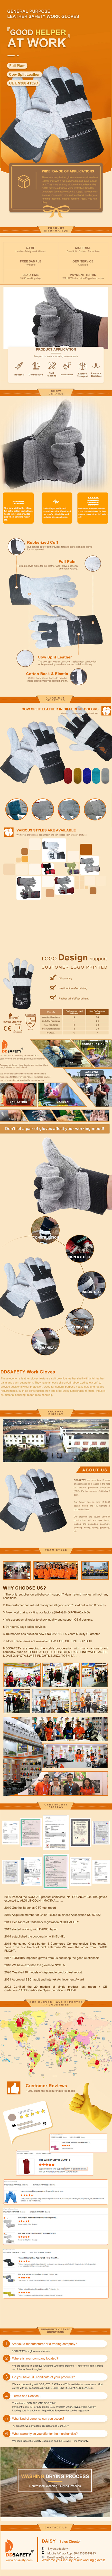 Heavy Duty Palm Work Gloves with Leather Palm, cowhide leather suede finish Rubberized cuff - DLC208 Heavy Duty Palm Work Gloves with Leather Palm, cowhide leather suede finish Rubberized cuff - DLC208 Palm Work Gloves,Heavy Duty Palm Work Gloves,Work Gloves with Leather Palm